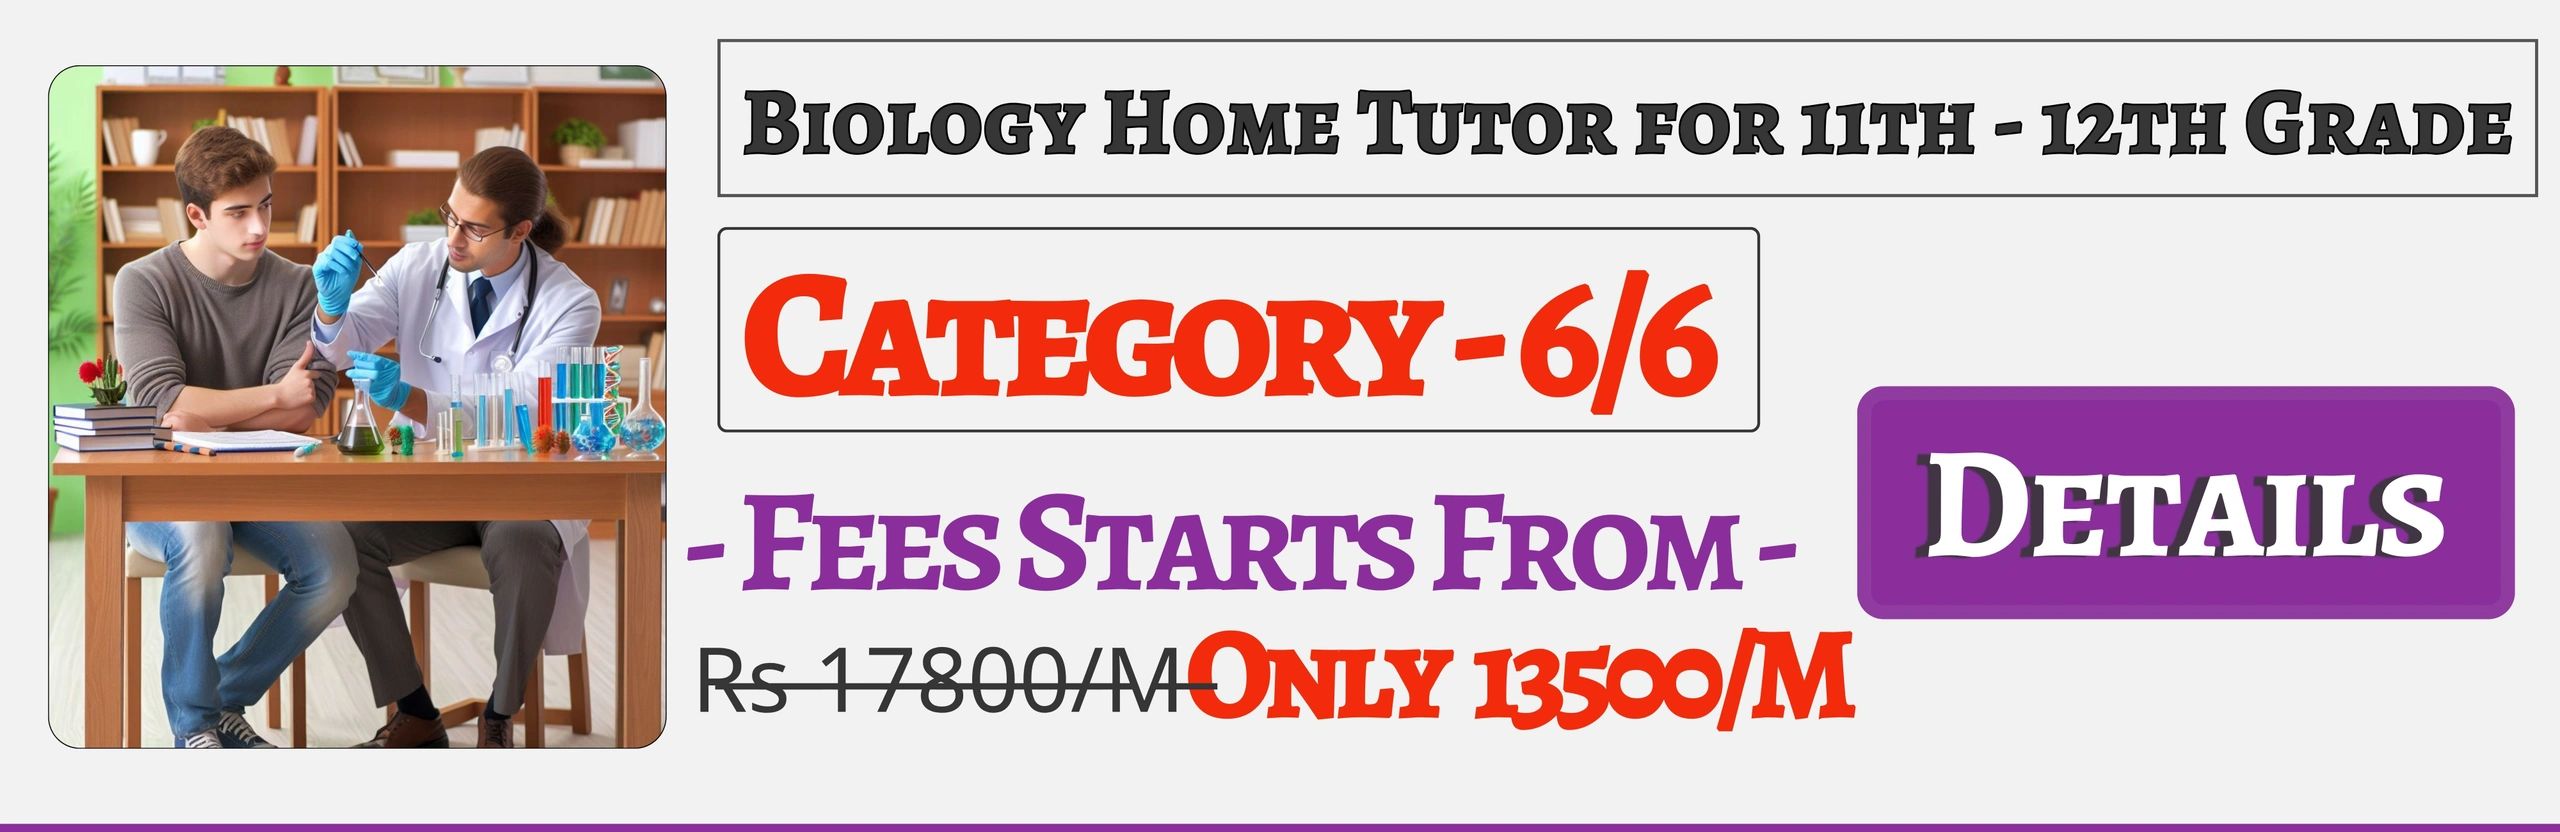 Book Best Nearby Biology Home Tuition Tutors For 11th & 12th In Jaipur , Fees Only 13500/M